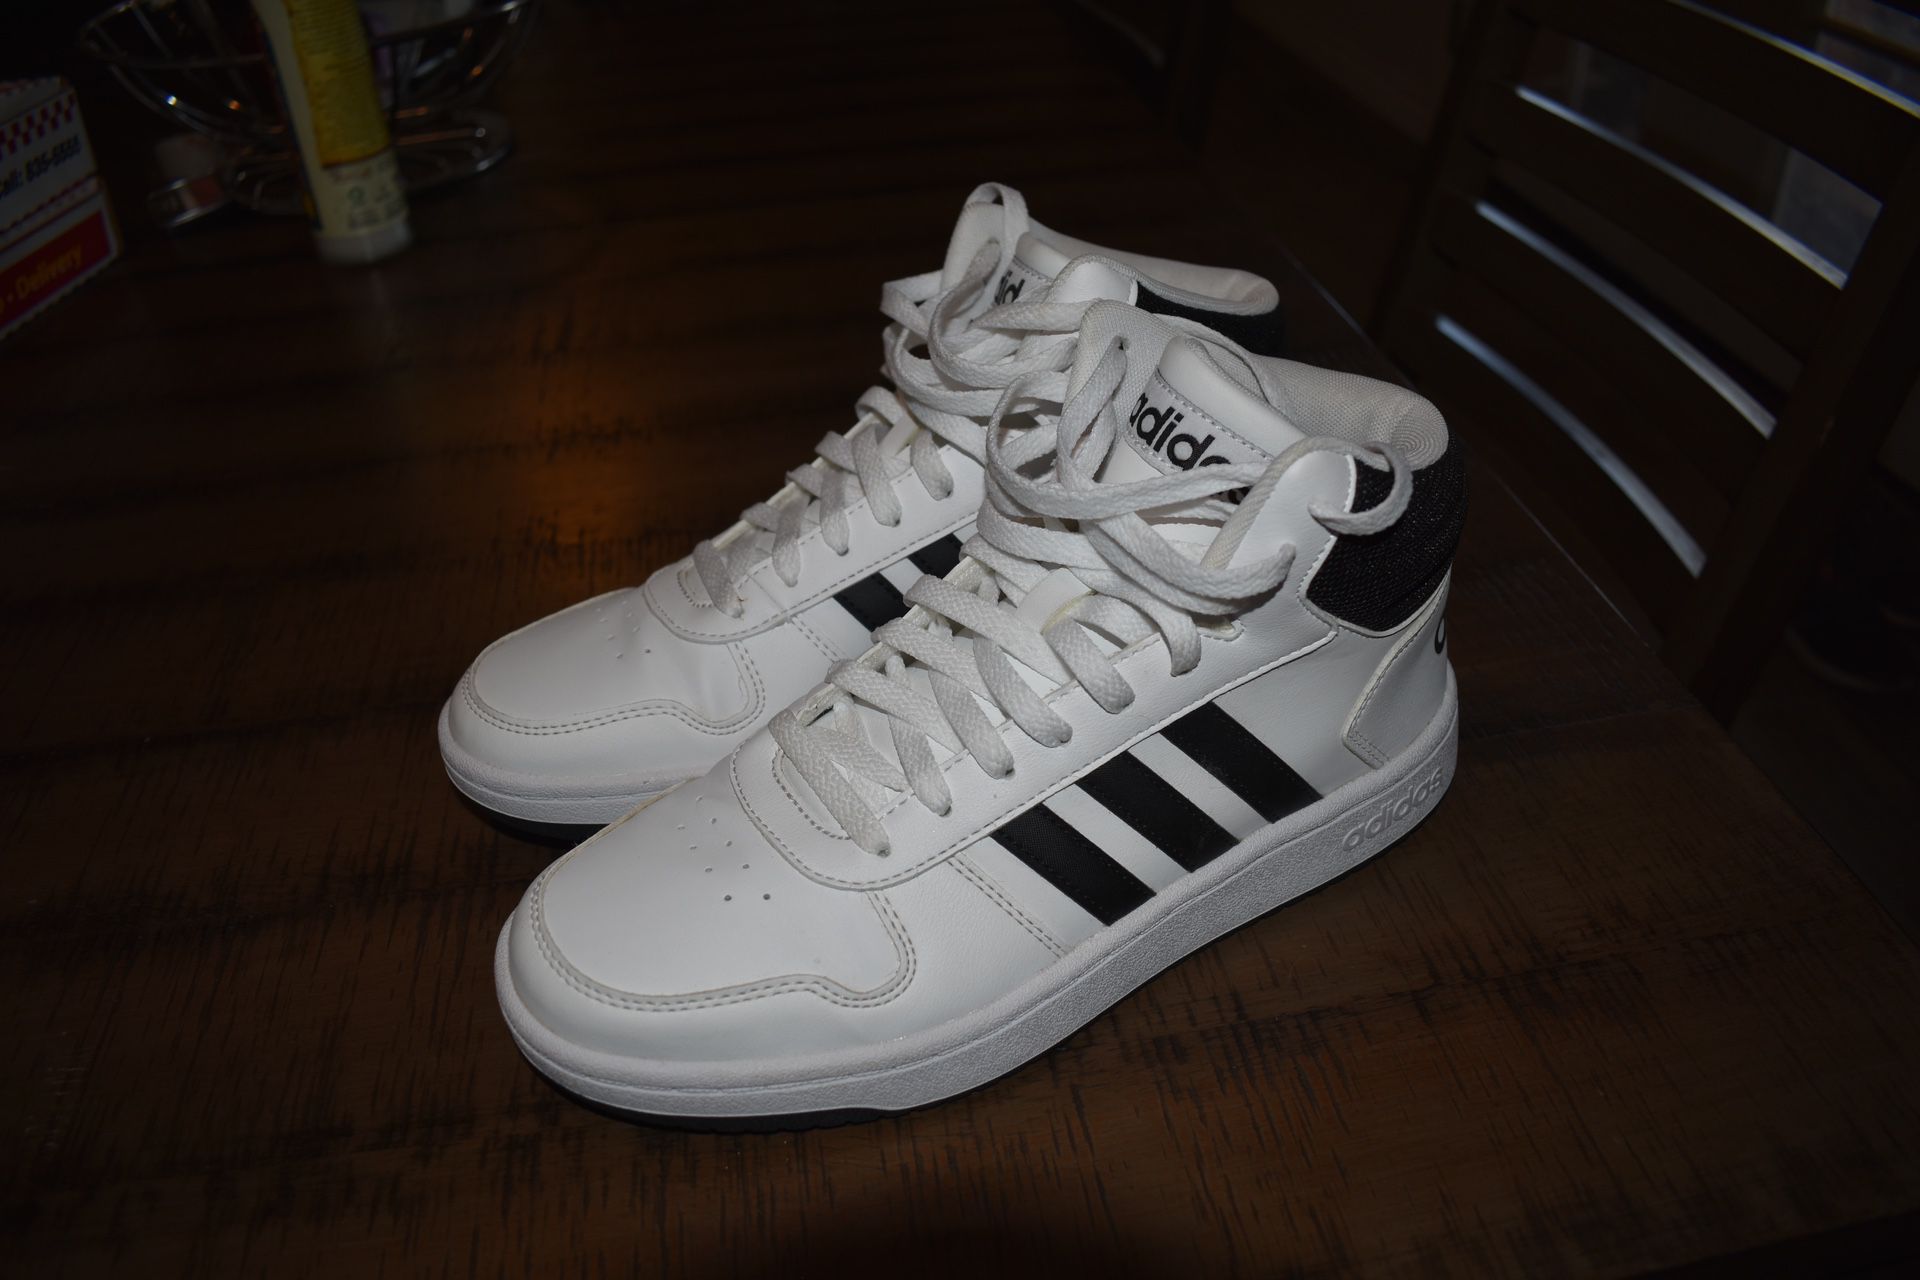 Adidas High Top Shoes (White, Size 8 Men)